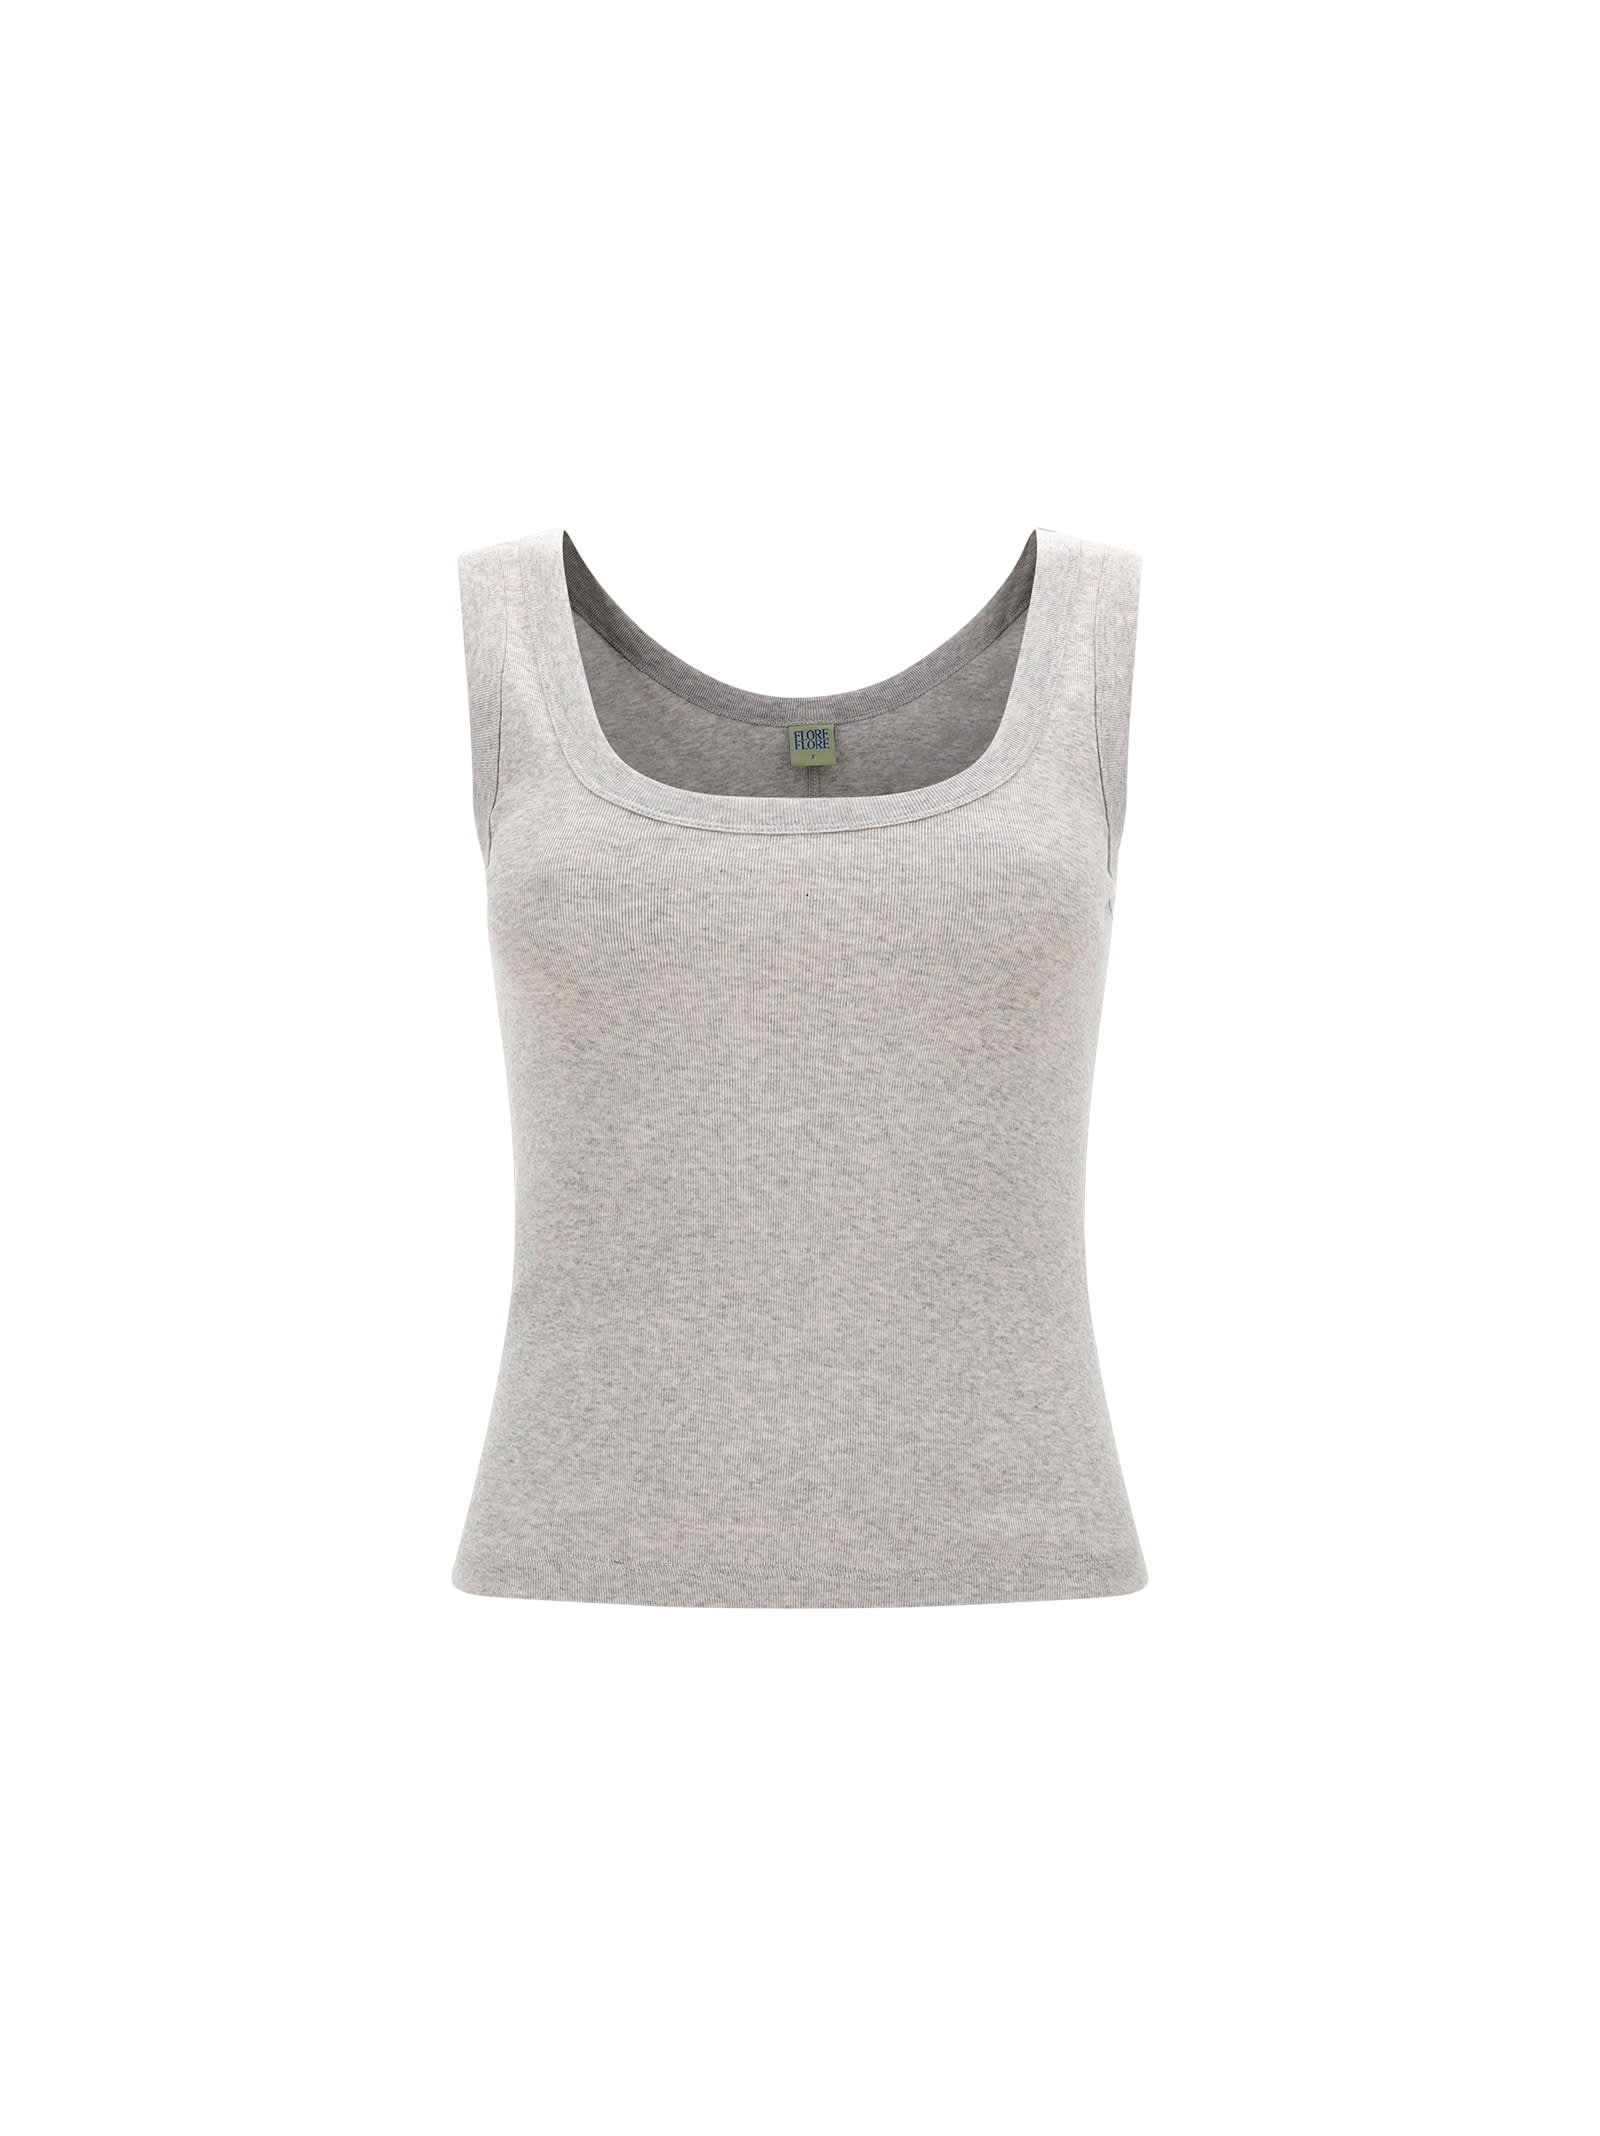 Flore Flore Hillie Tank Top In Heather Grey